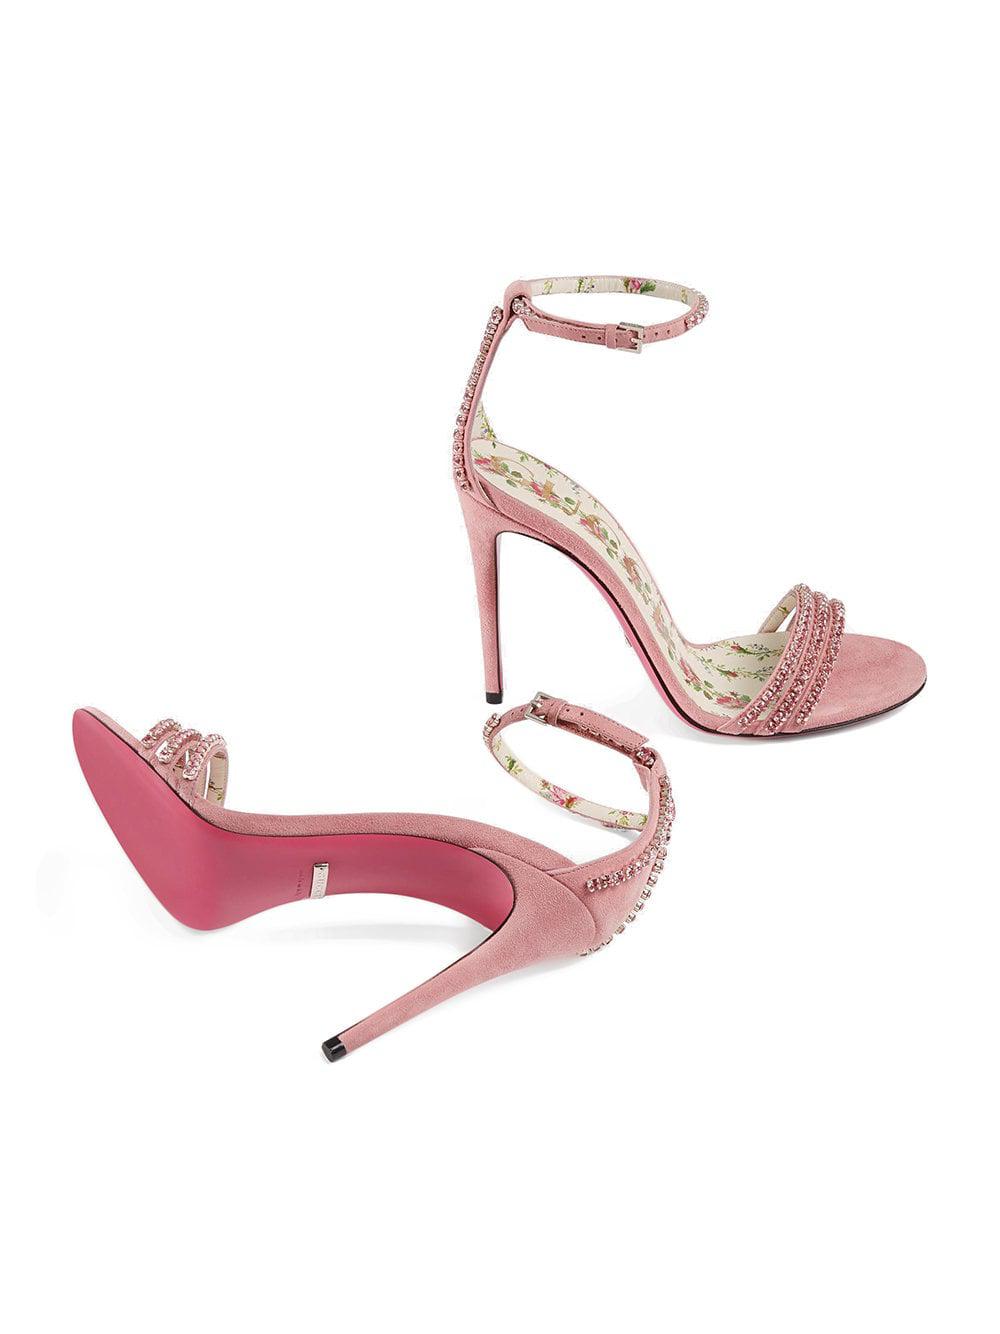 Gucci high heels sandals with crystals review